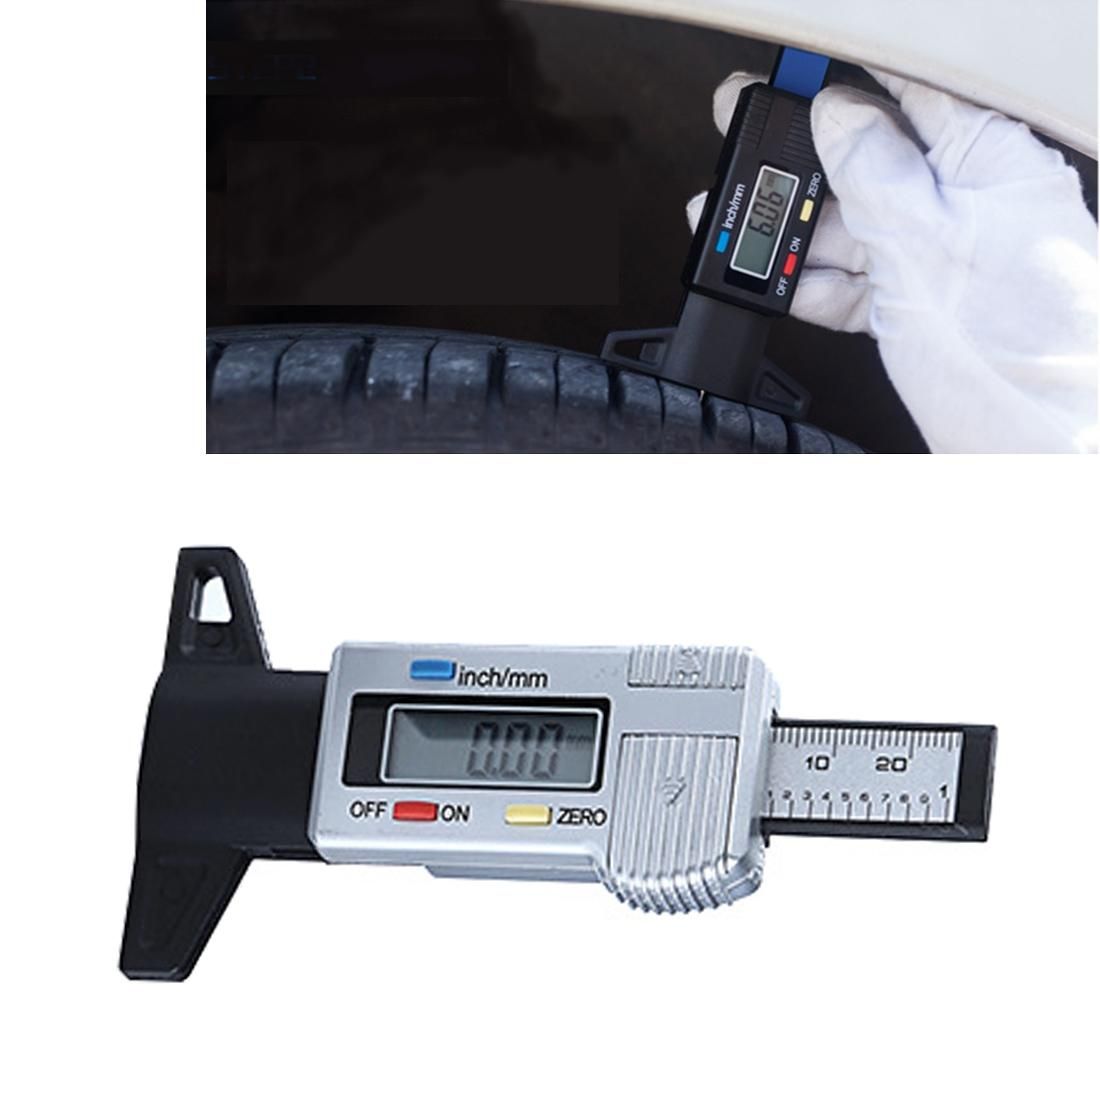 0-25mm Electronic Digital Tread Plan Refinding Rounds Refinding Outcome Exists Tread Tablets Type Gauge Depth Vernier Caliper Measuring Tools (Silver)